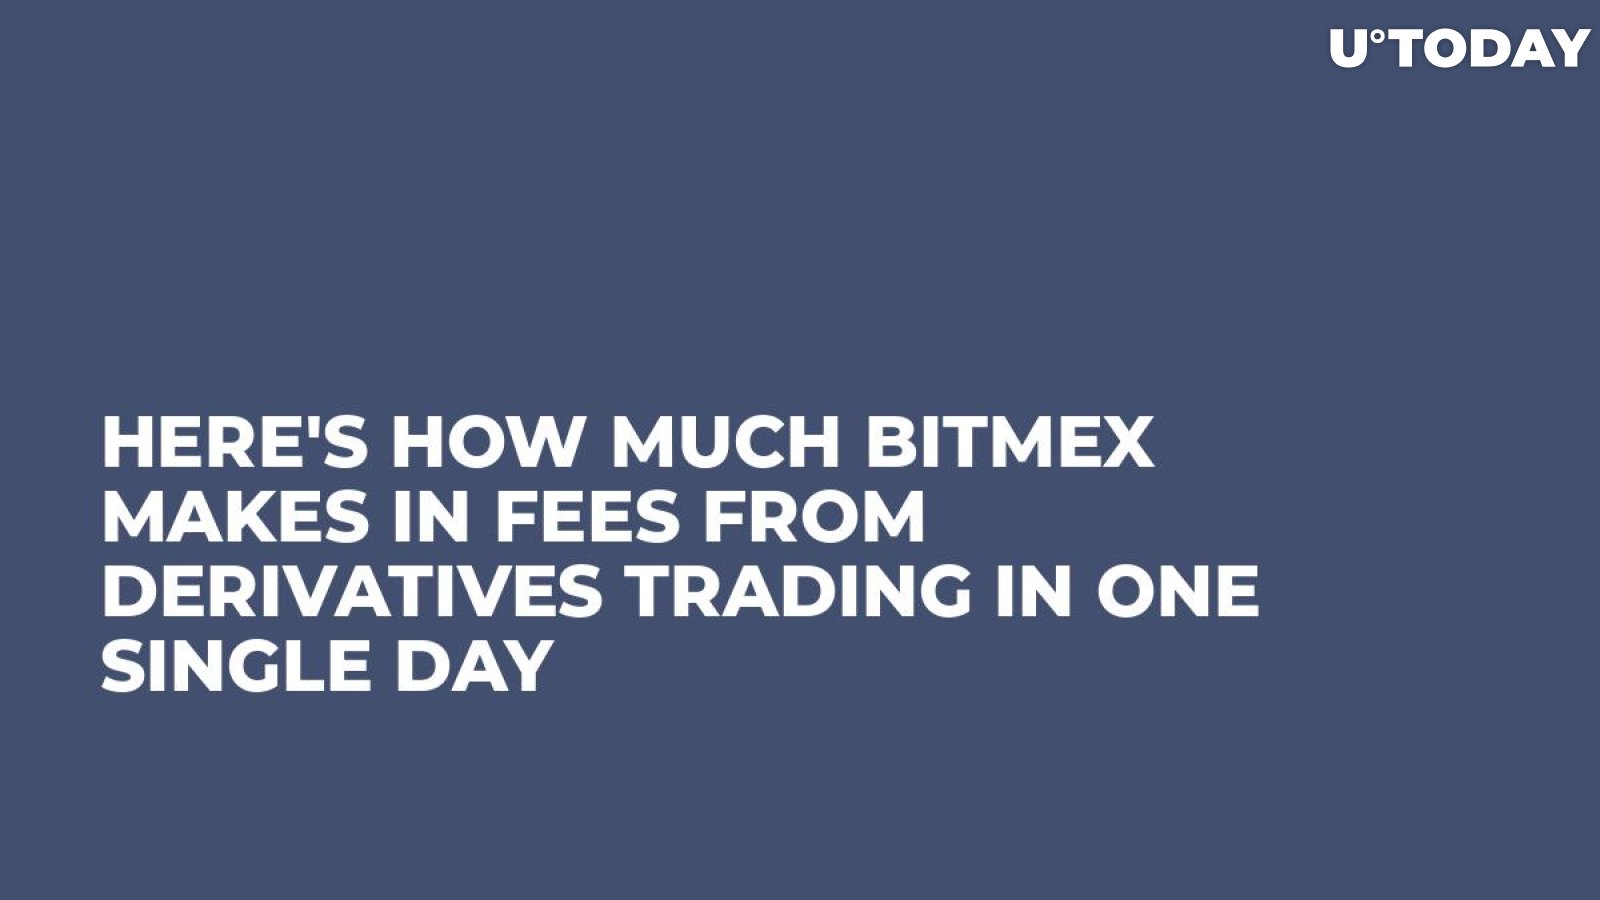 Here's How Much BitMEX Makes in Fees from Derivatives Trading in One Single Day